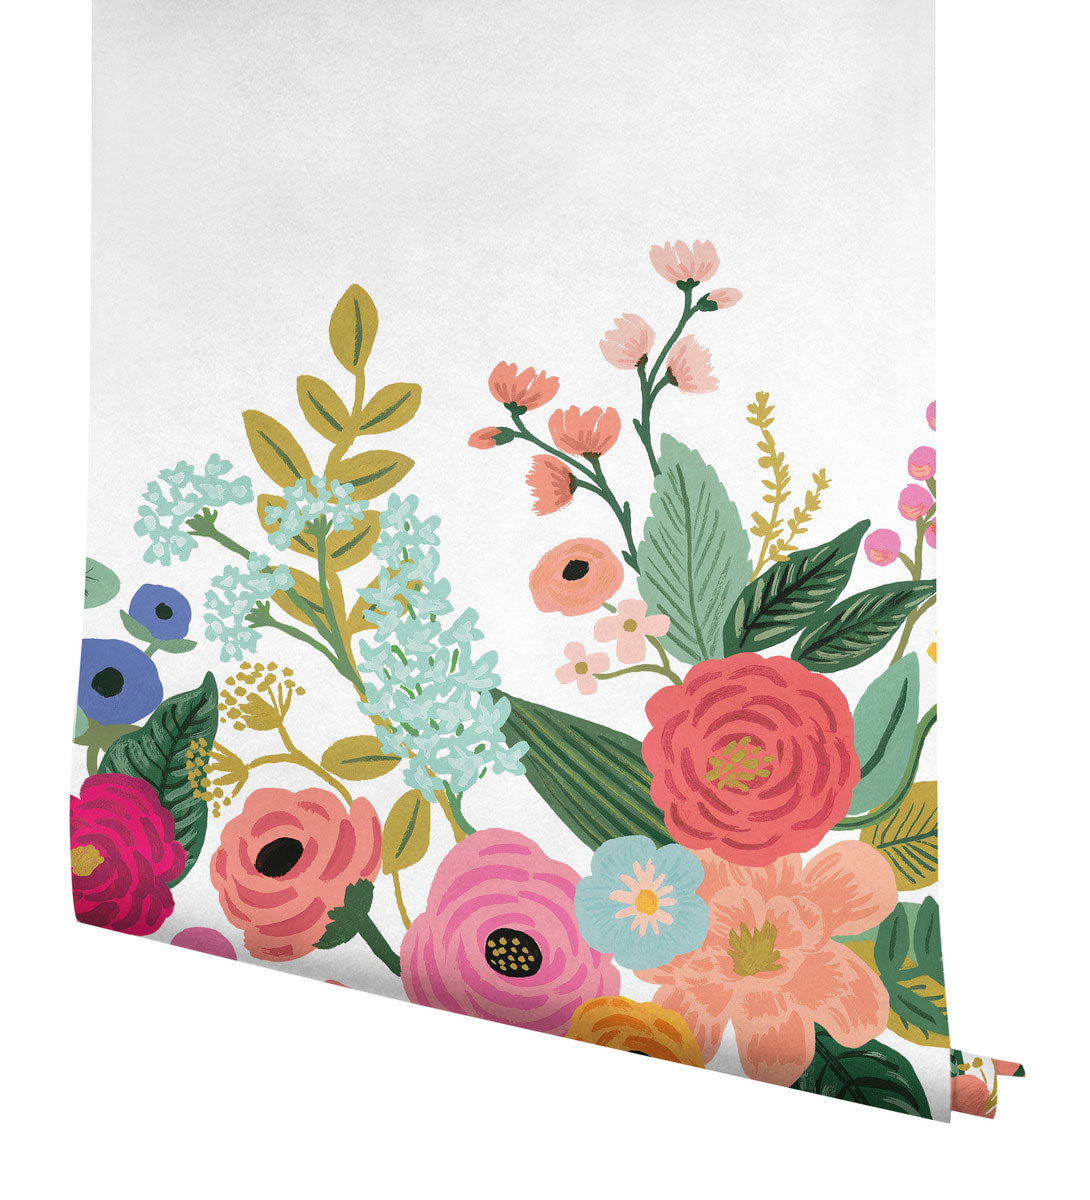 Handmade Large Navy Pink Floral Rifle Paper Co Print Make up